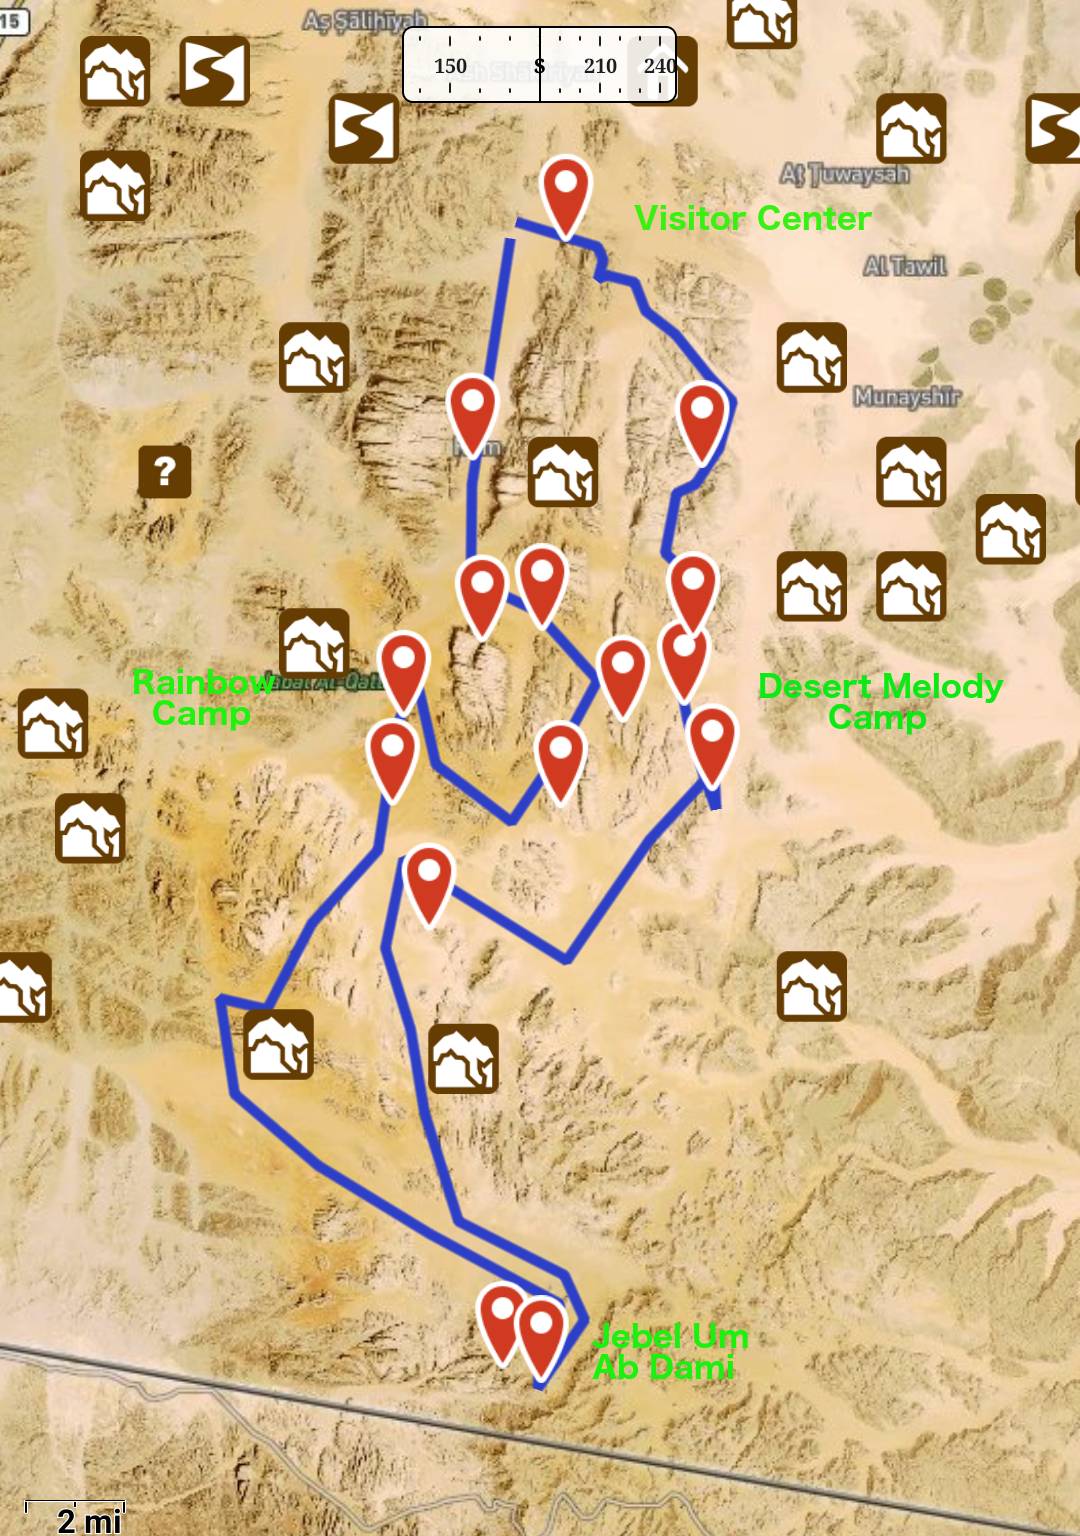 Wadi Rum Overview Map Hiking Multi-day